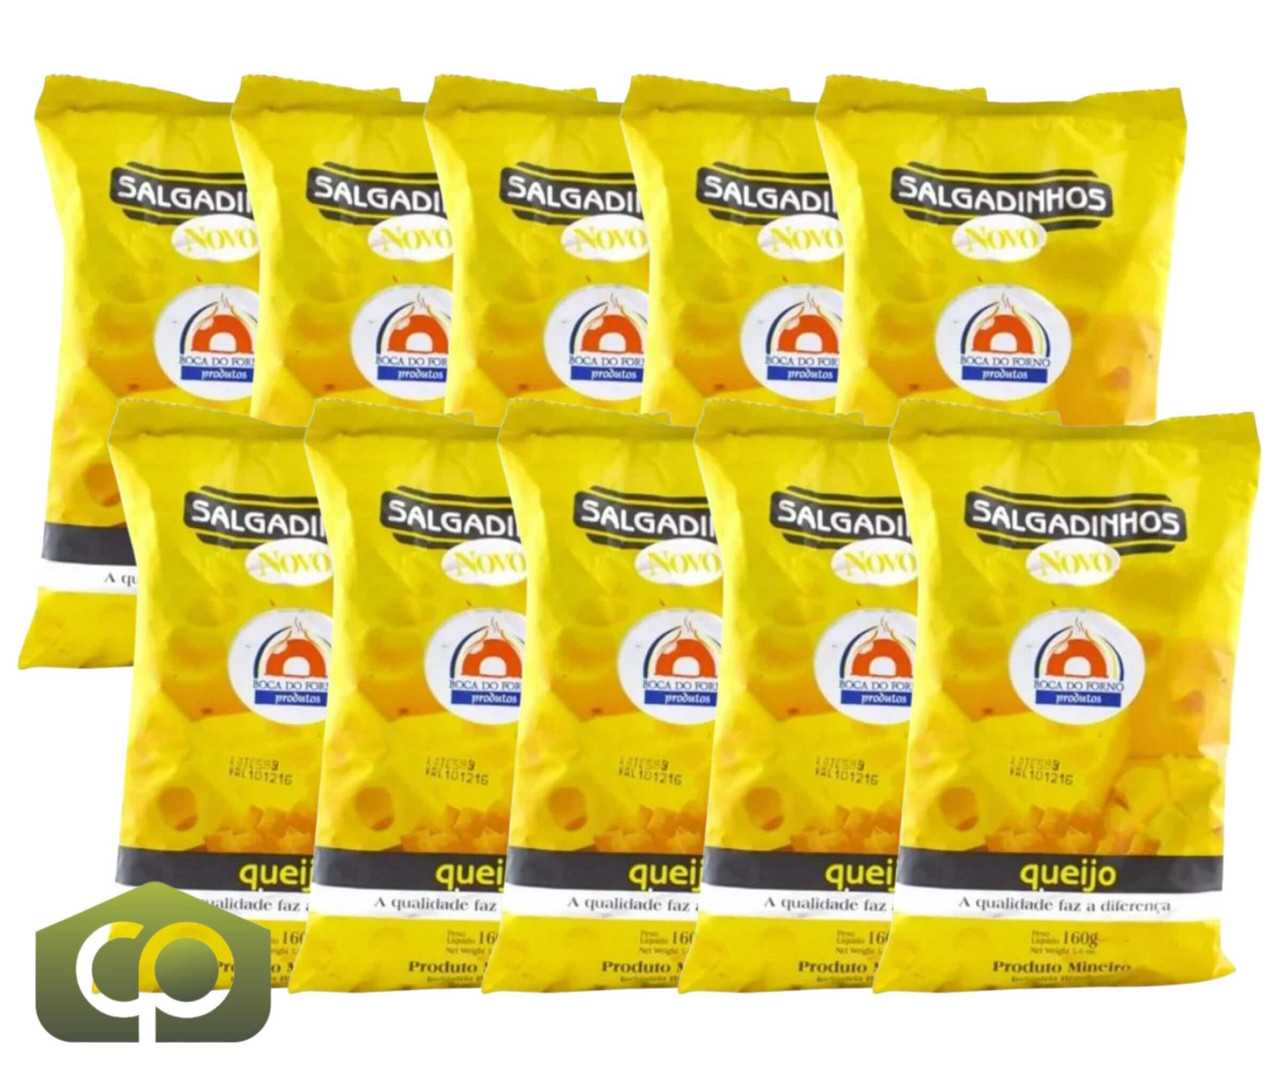 BOCA DO FORNO Cheese Chips Half-Box 10-CASE - 160g Each | Savory Cheese Snack - Chicken Pieces